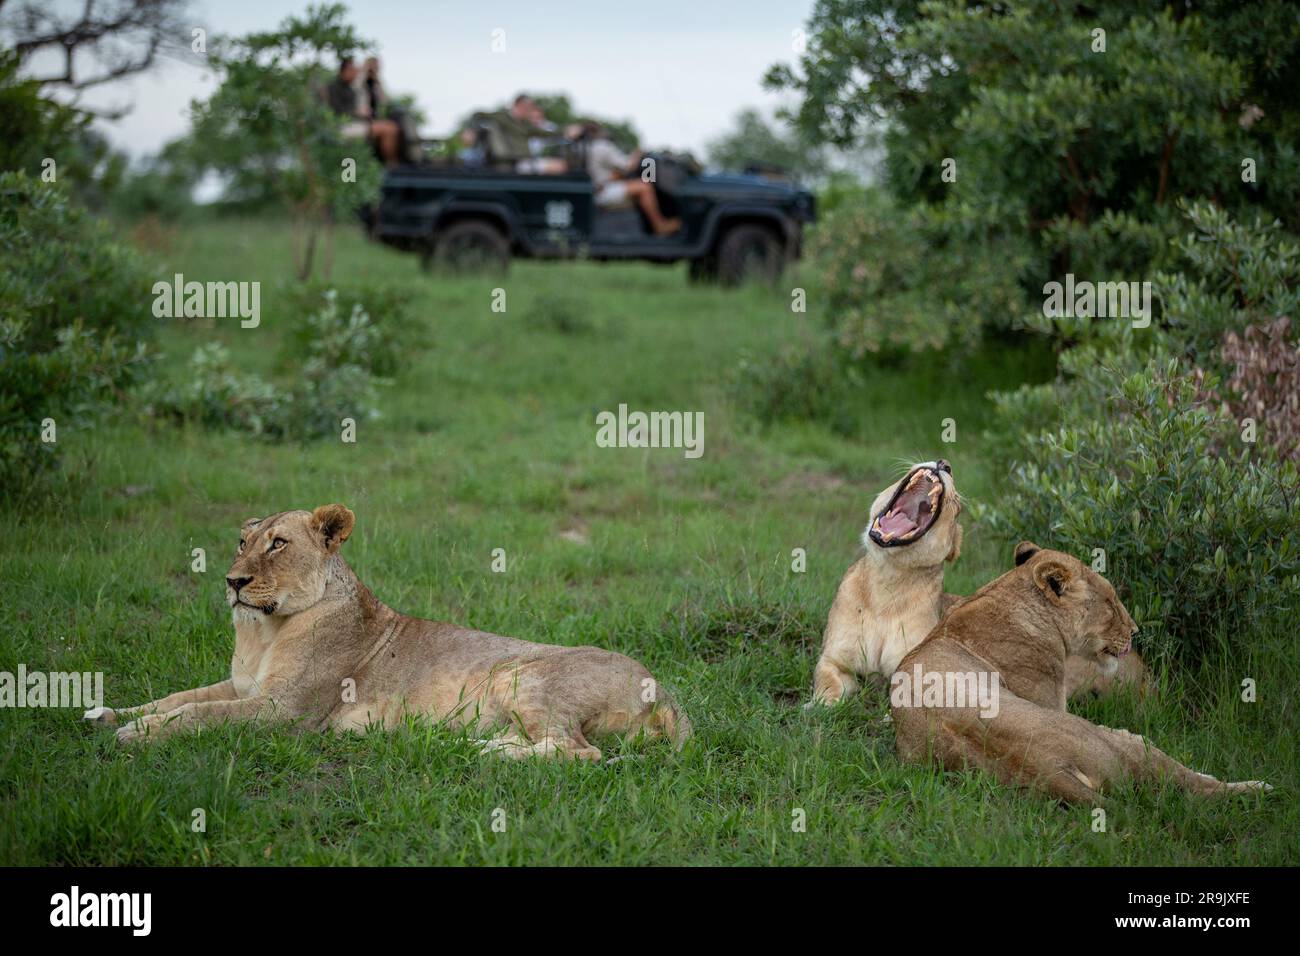 Three lionesses, Panthera leo,  lie together in grass, with a game drive vehicle in the backround. Stock Photo